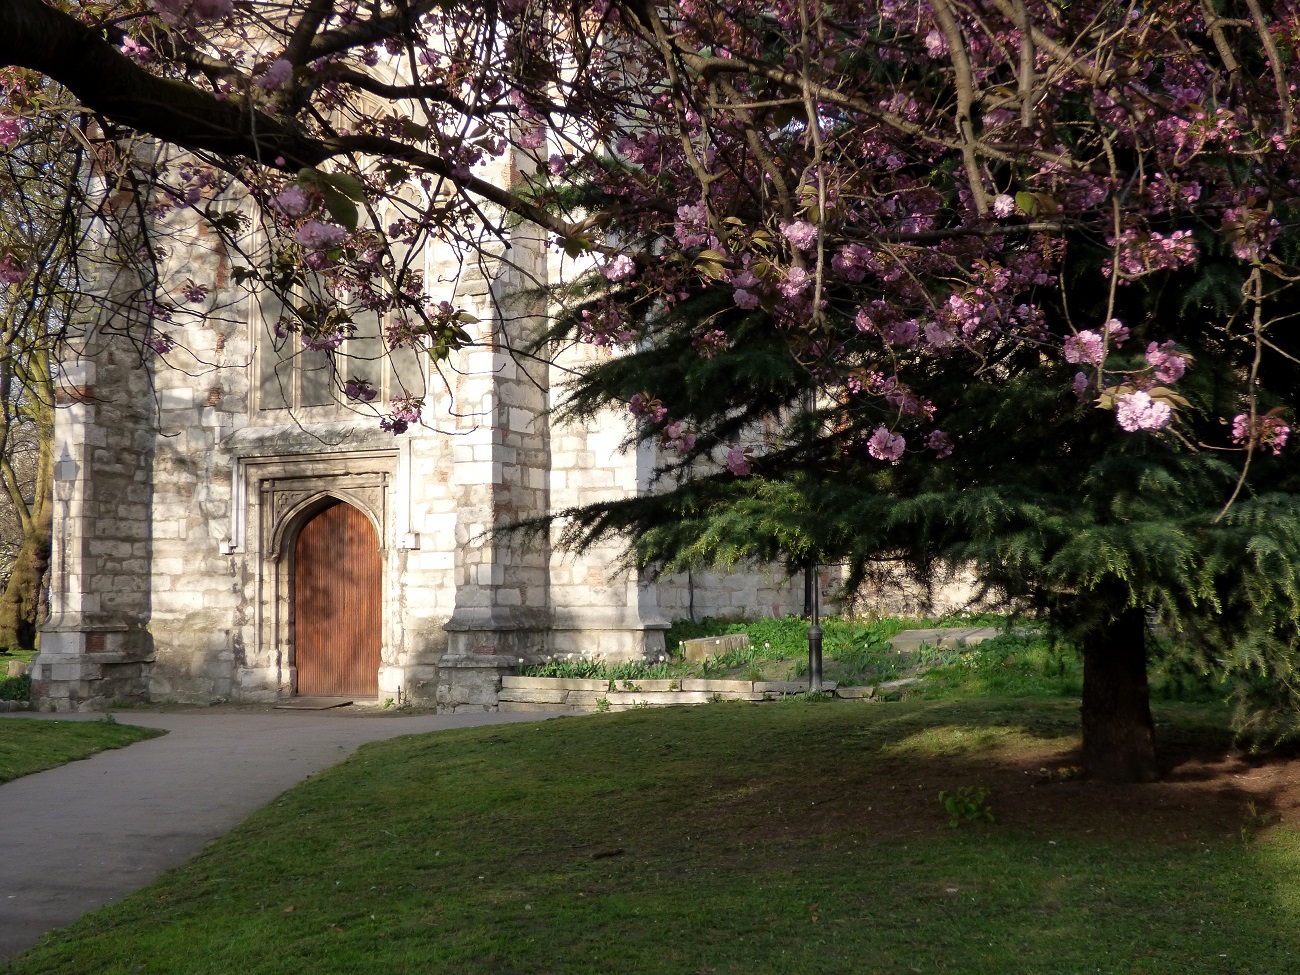 20170403_Newham_West-Ham-Parich-Church_Blossom-in-the-foreground